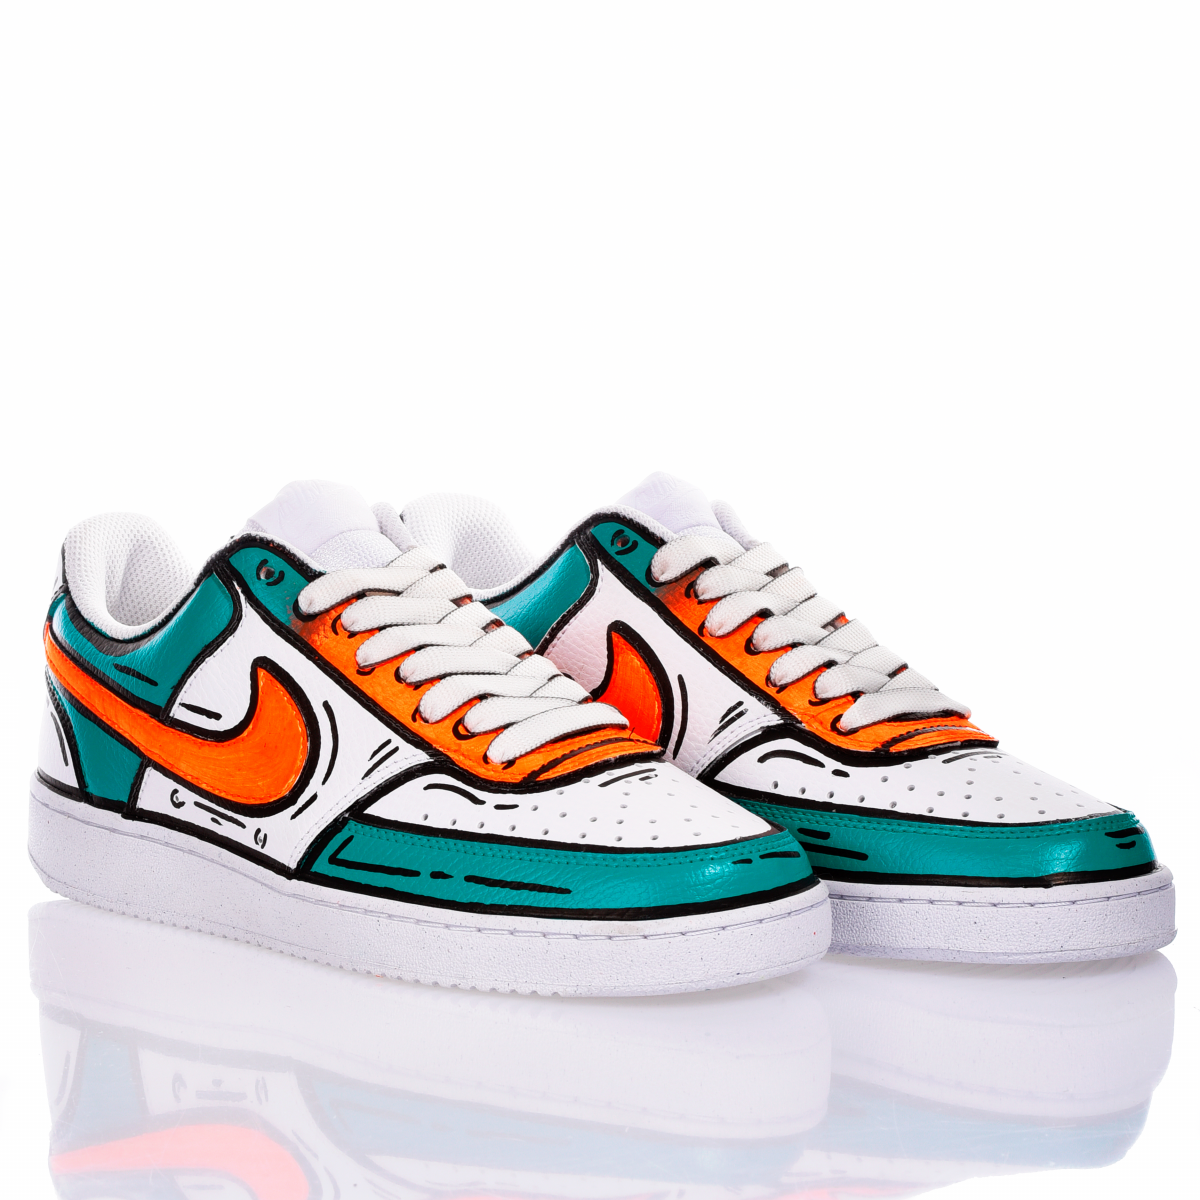 Nike Comics Ottanio Air Force Vision Special